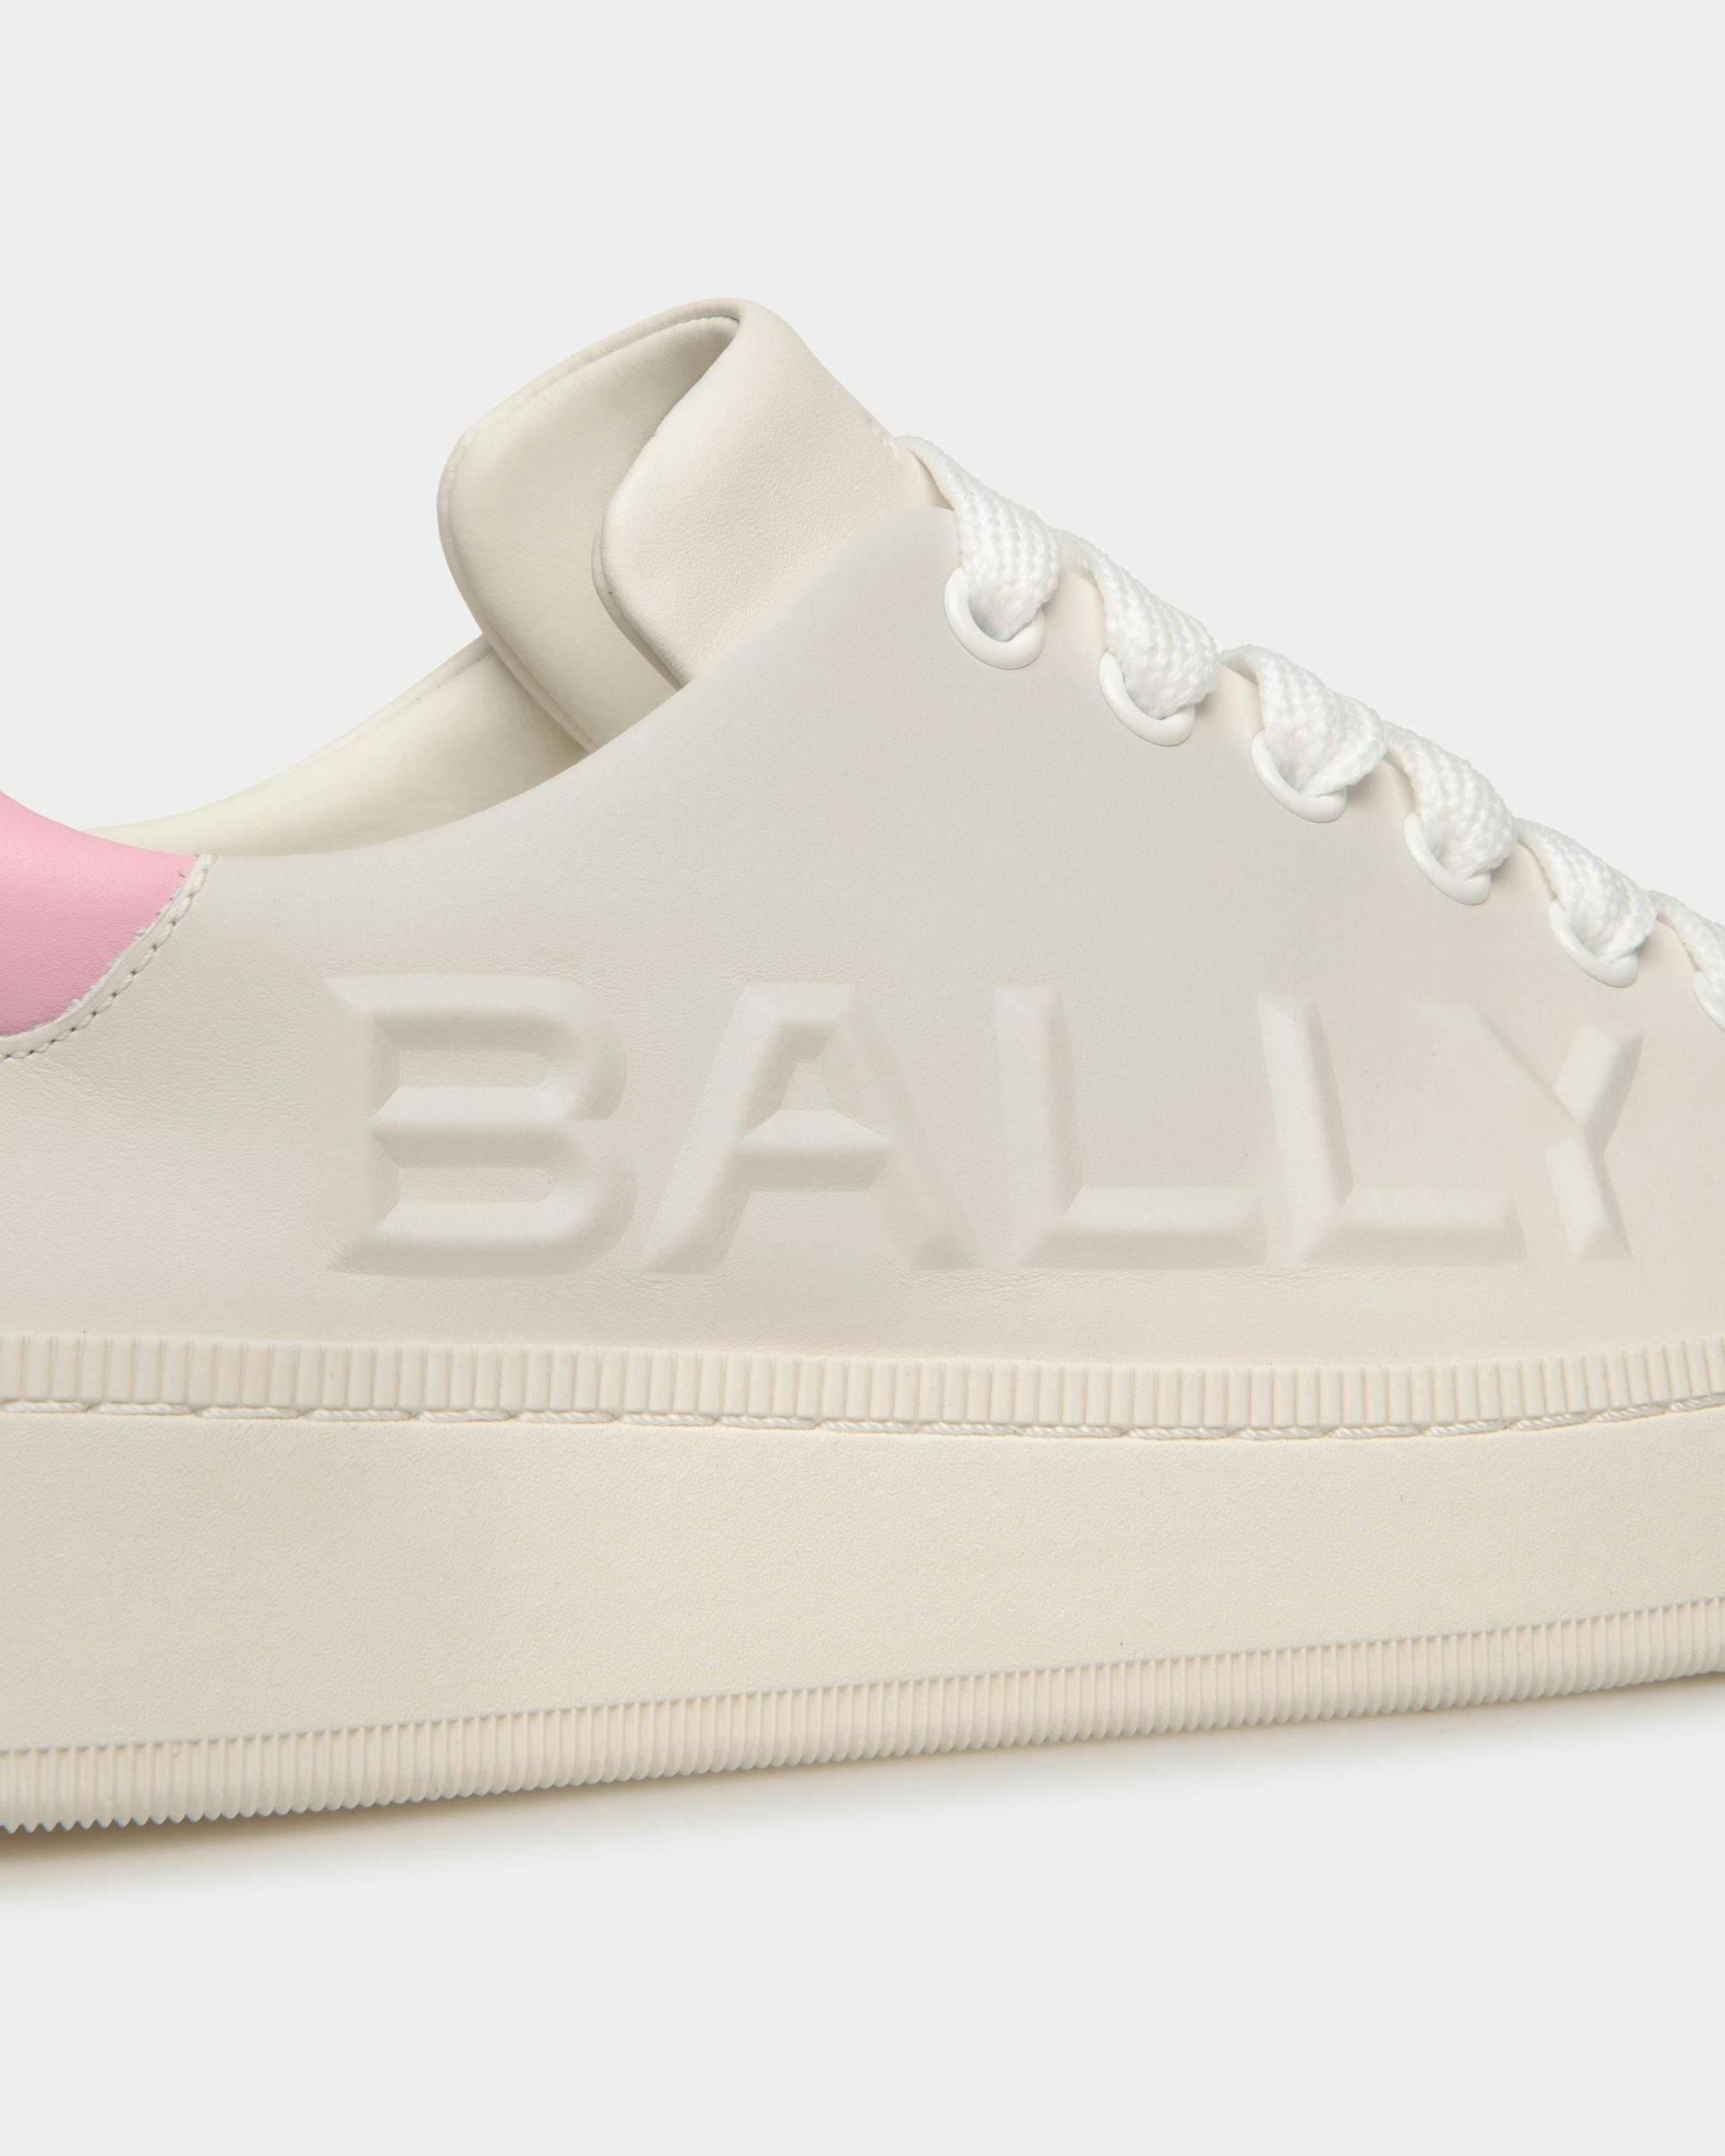 Women's Raise Sneaker In White And Pink Leather | Bally | Still Life Detail